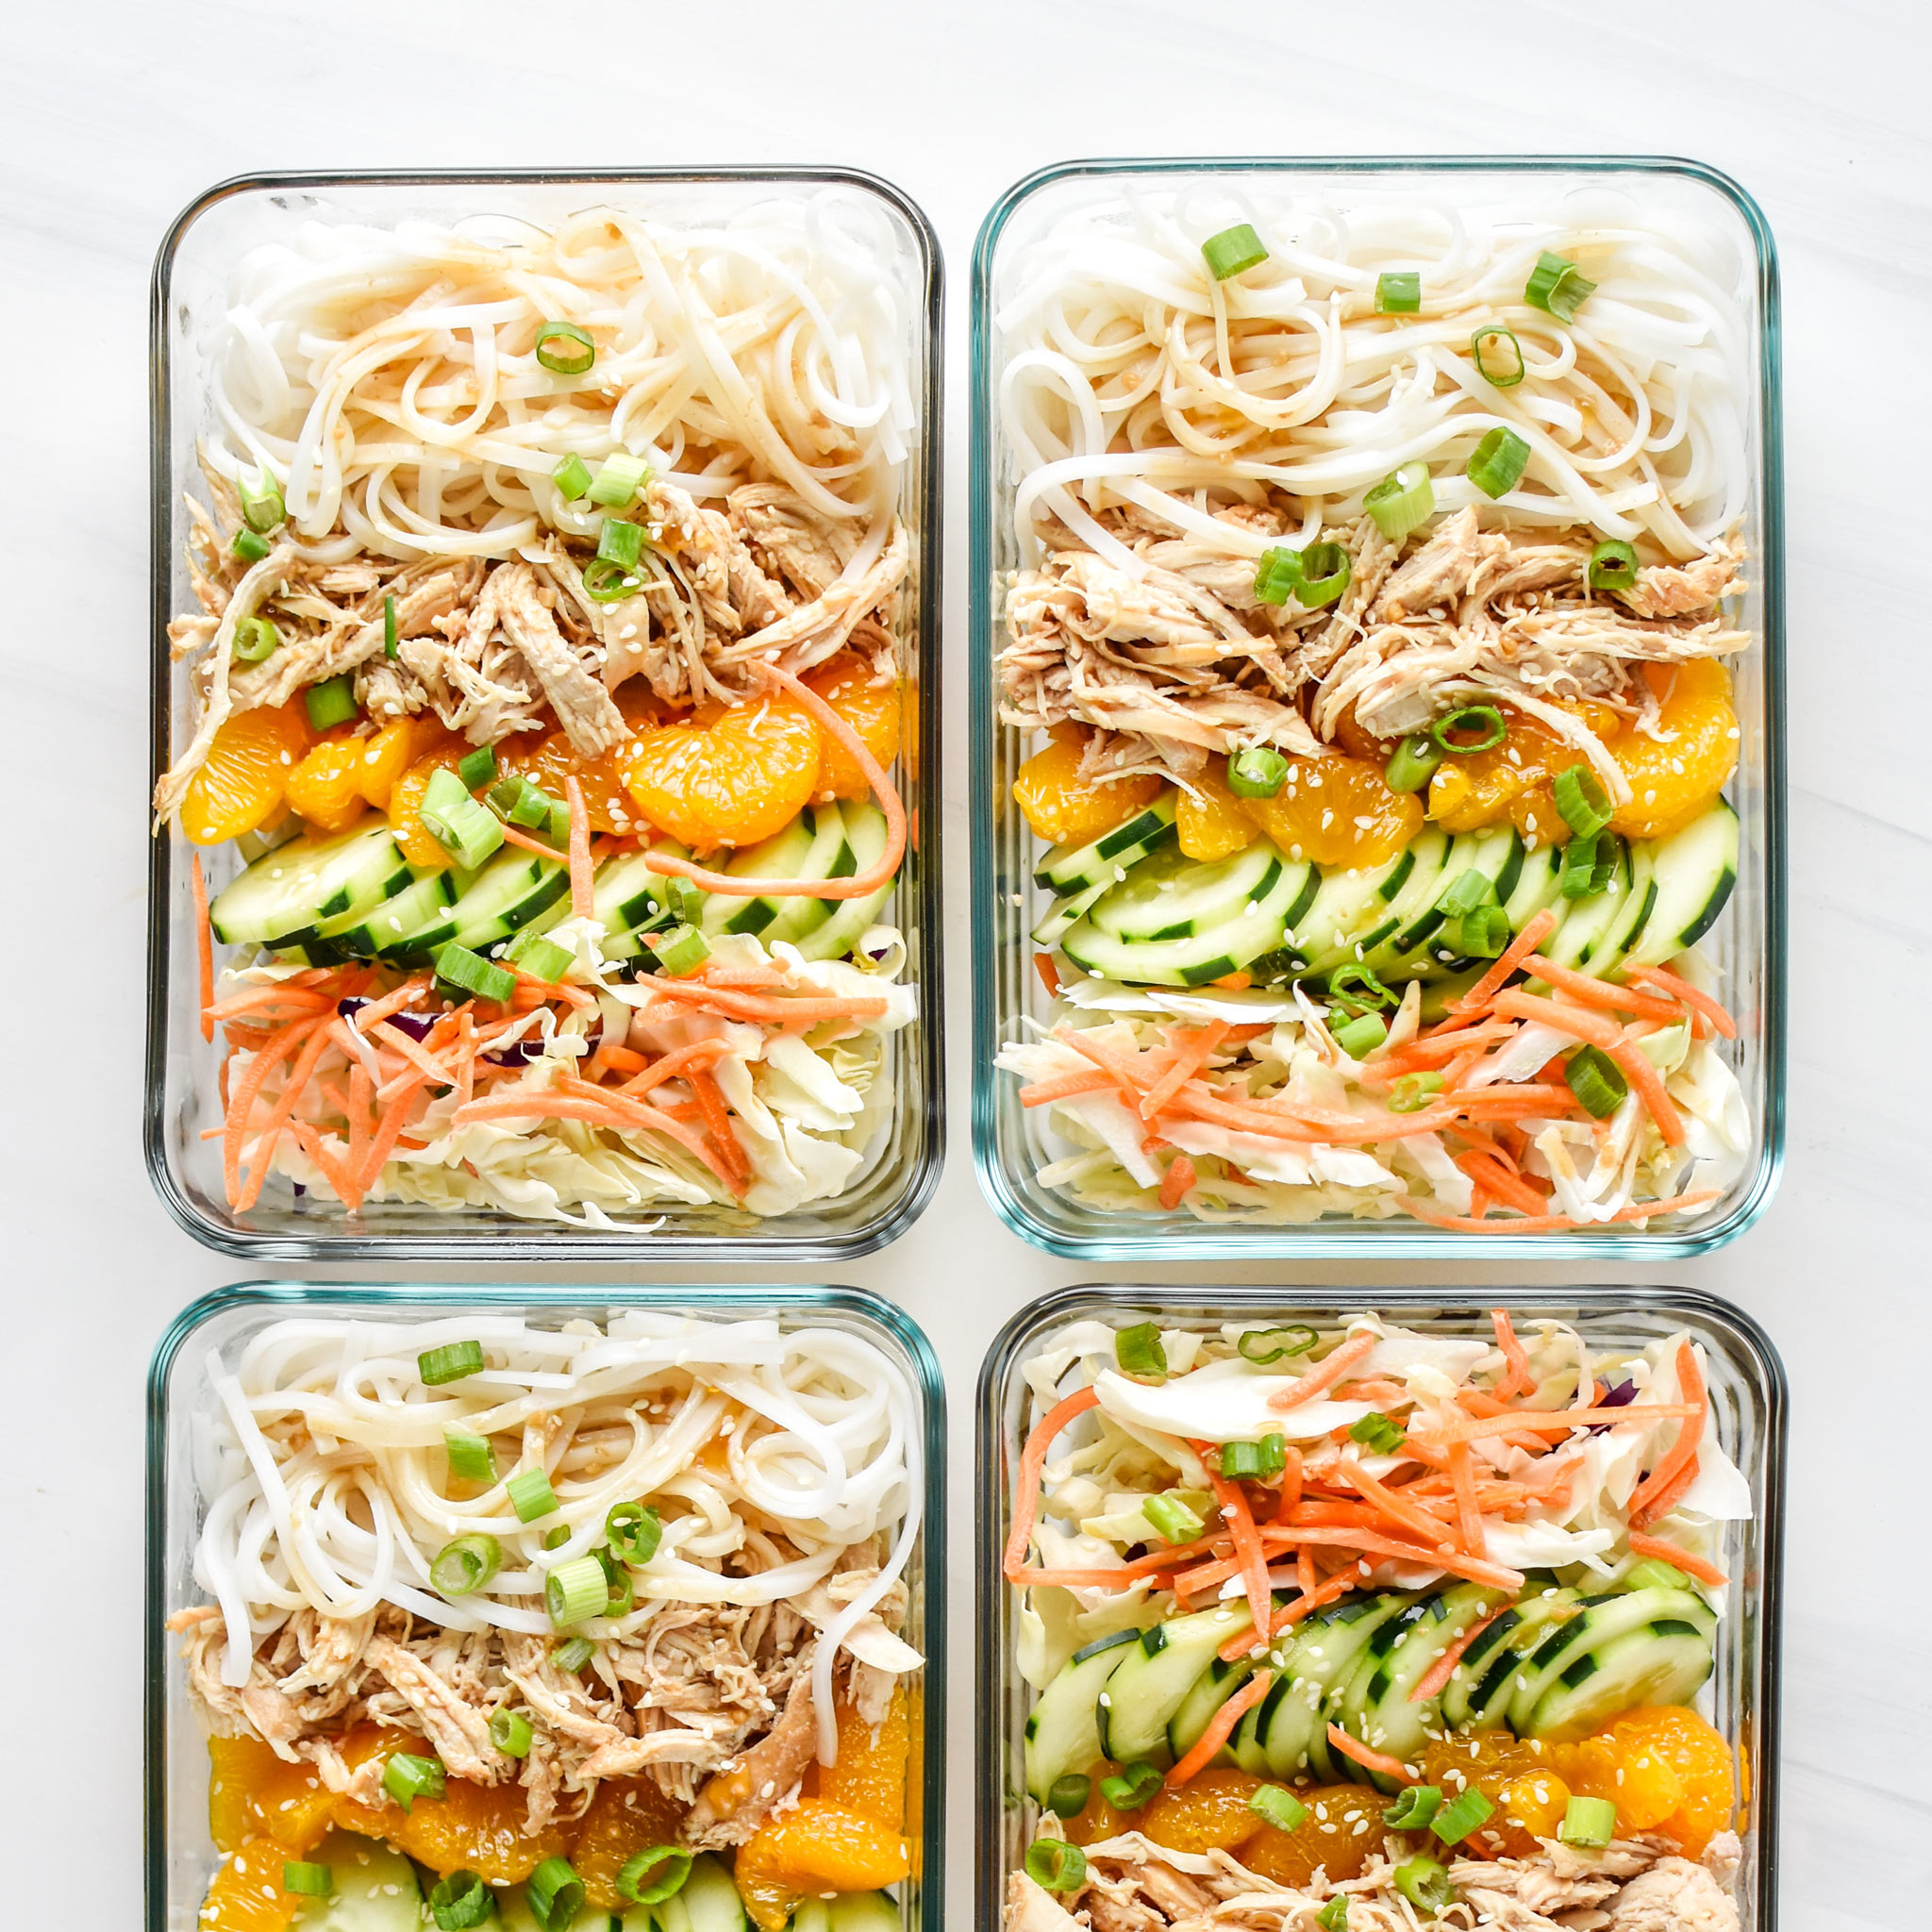 Sesame chicken Cold Rice Noodle Salad Lunches from above in meal prep containers